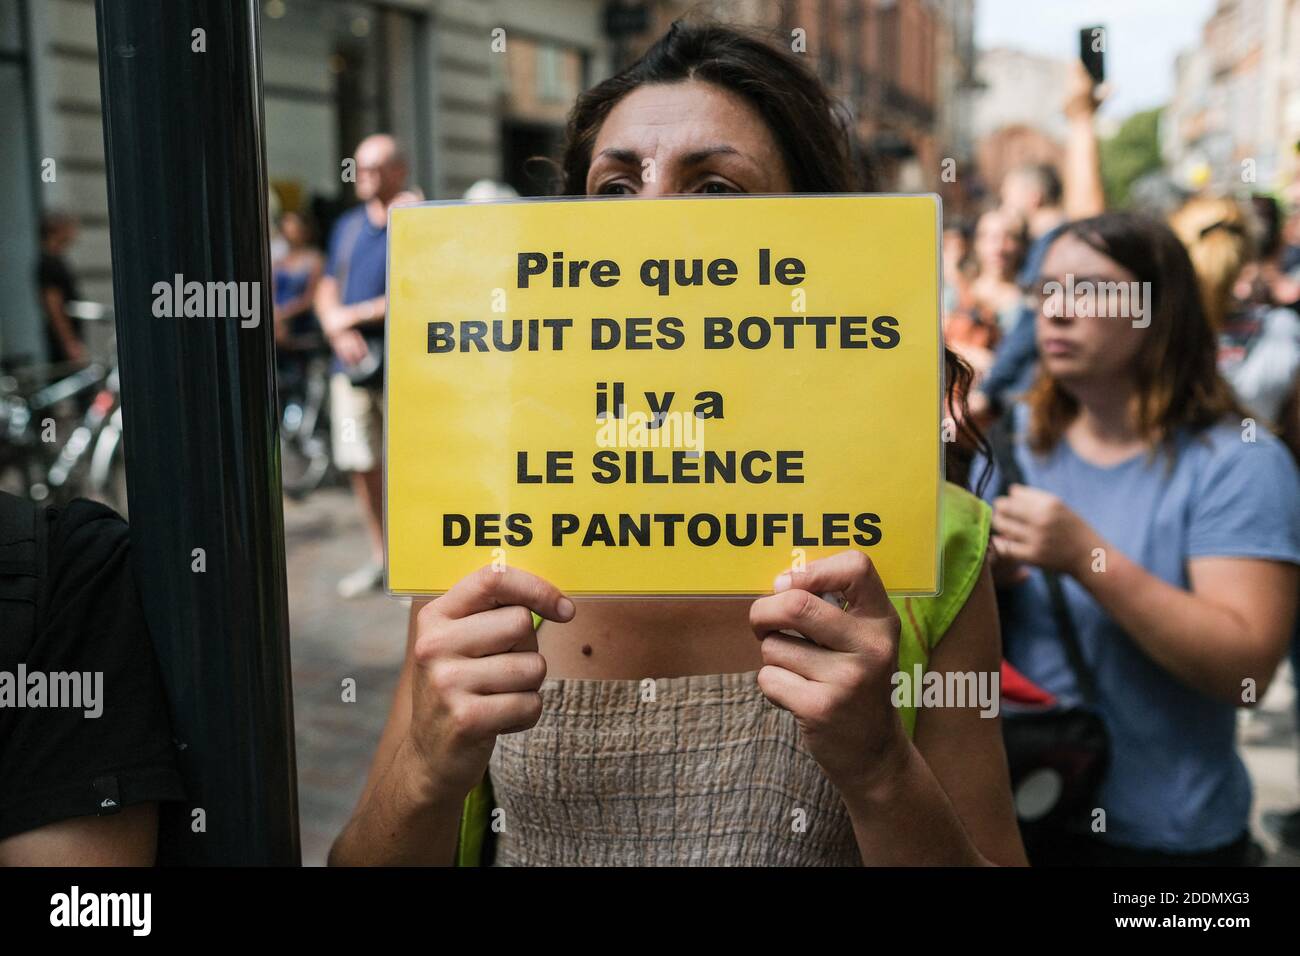 Protester with yellow sign "Worse than the sound of boots, there is the  silence of the slippers" (Pire que le bruit des bottes, il y a le silence des  pantoufles). For the